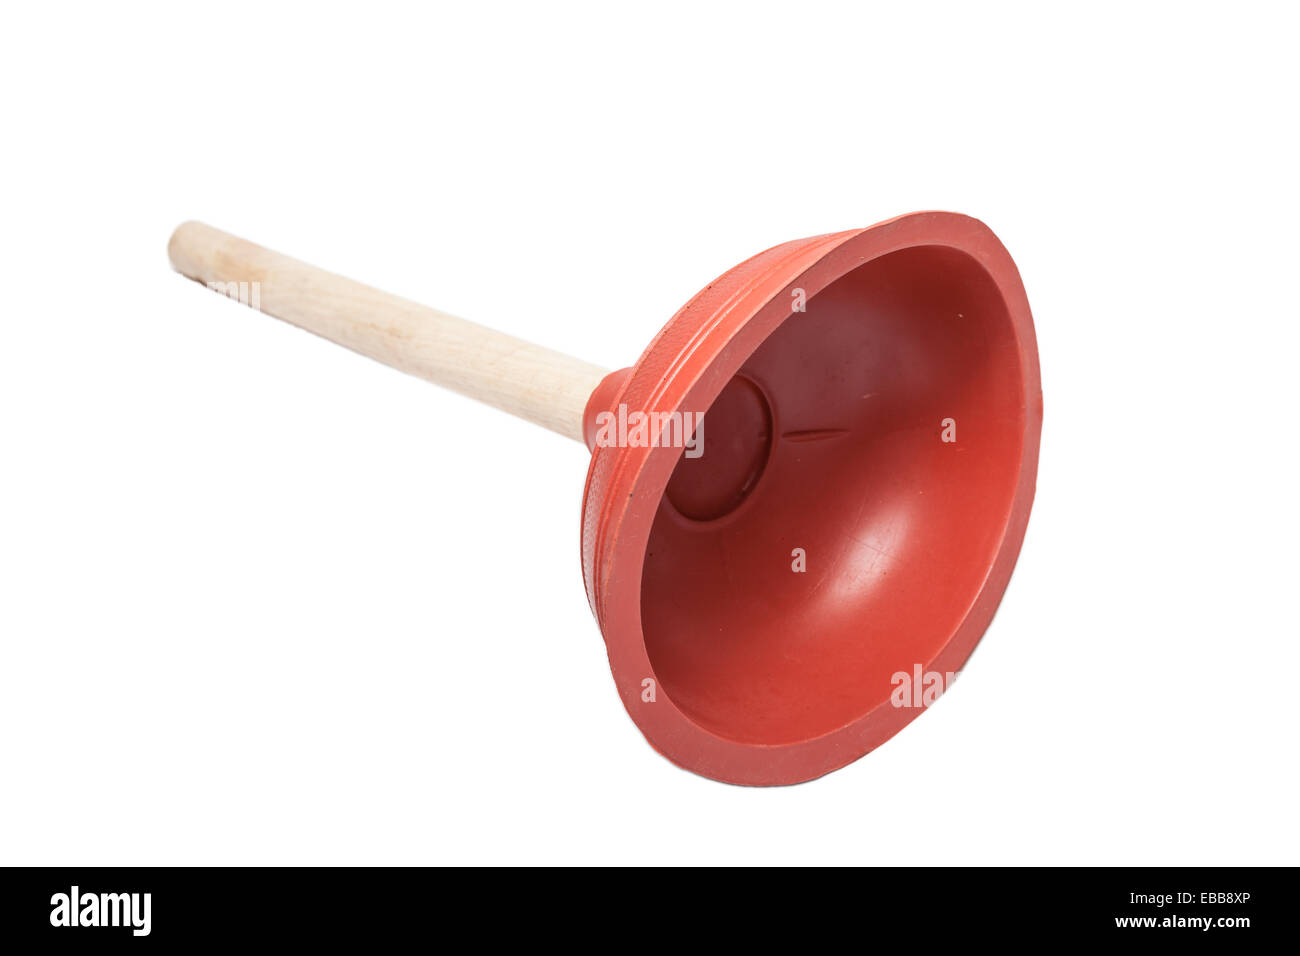 Plumber with rubber plunger isolated Stock Photo